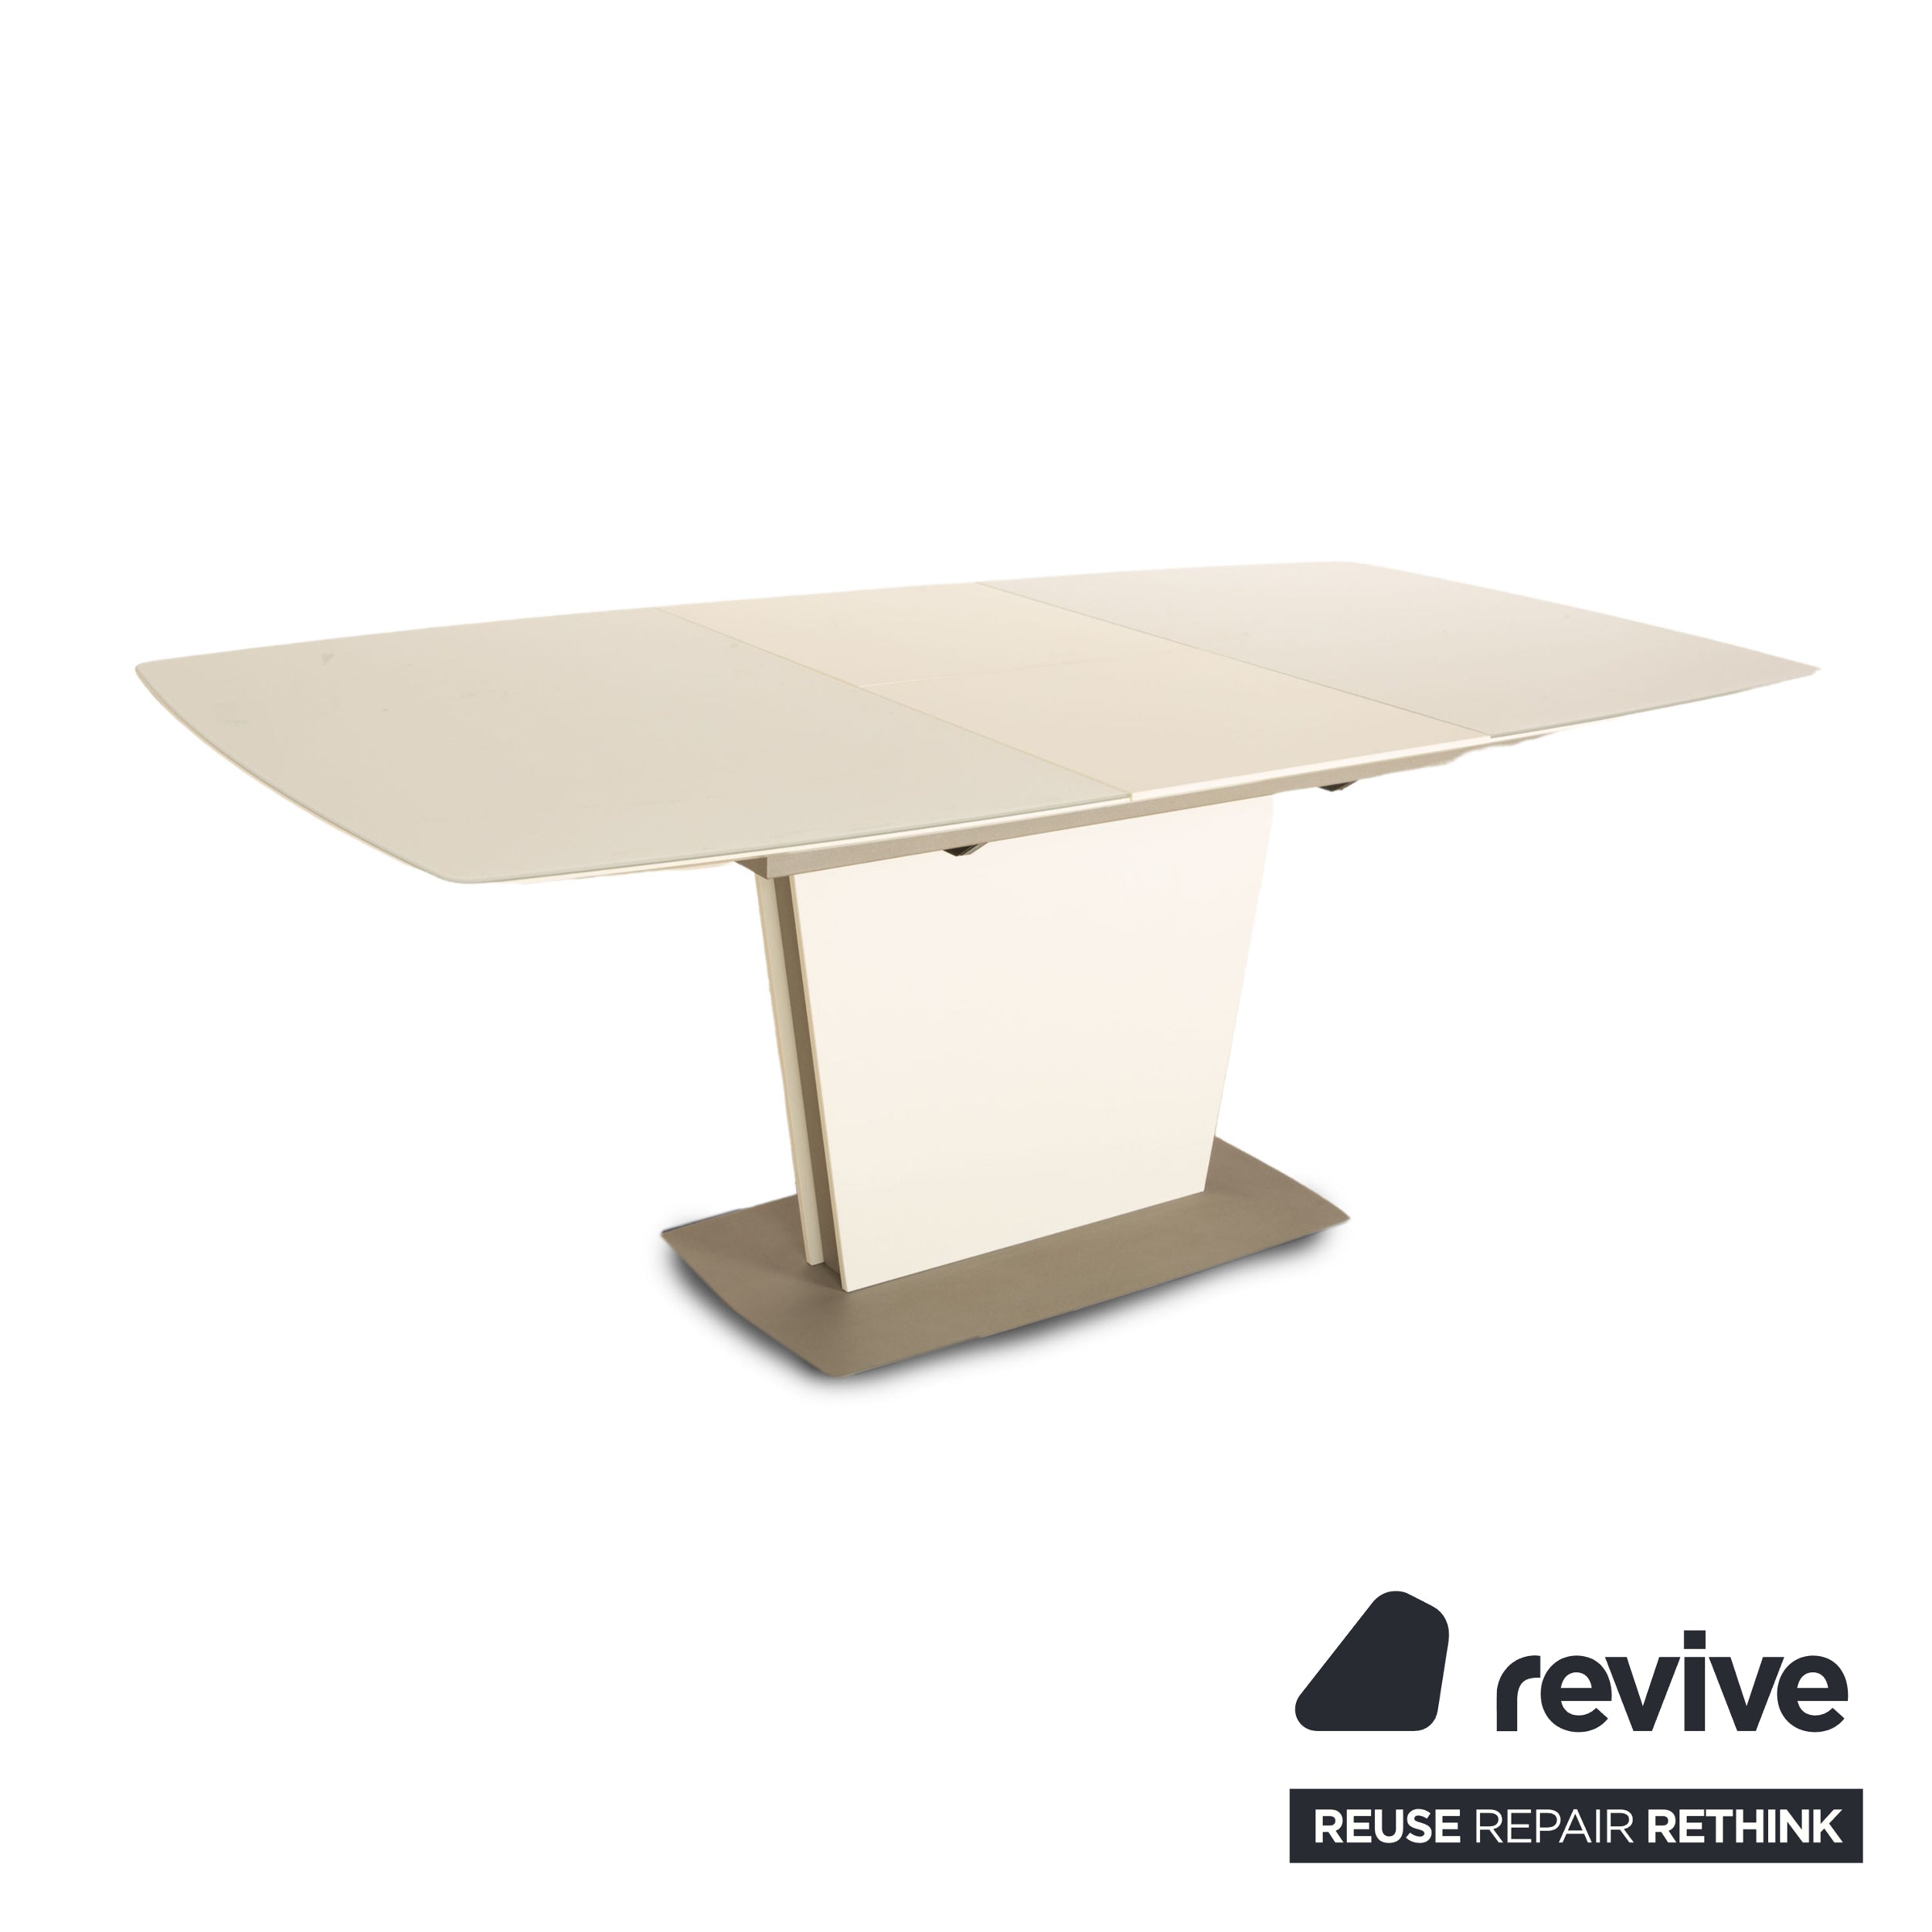 BoConcept Milano wooden dining table white extendable 140/190 x 75 x 100